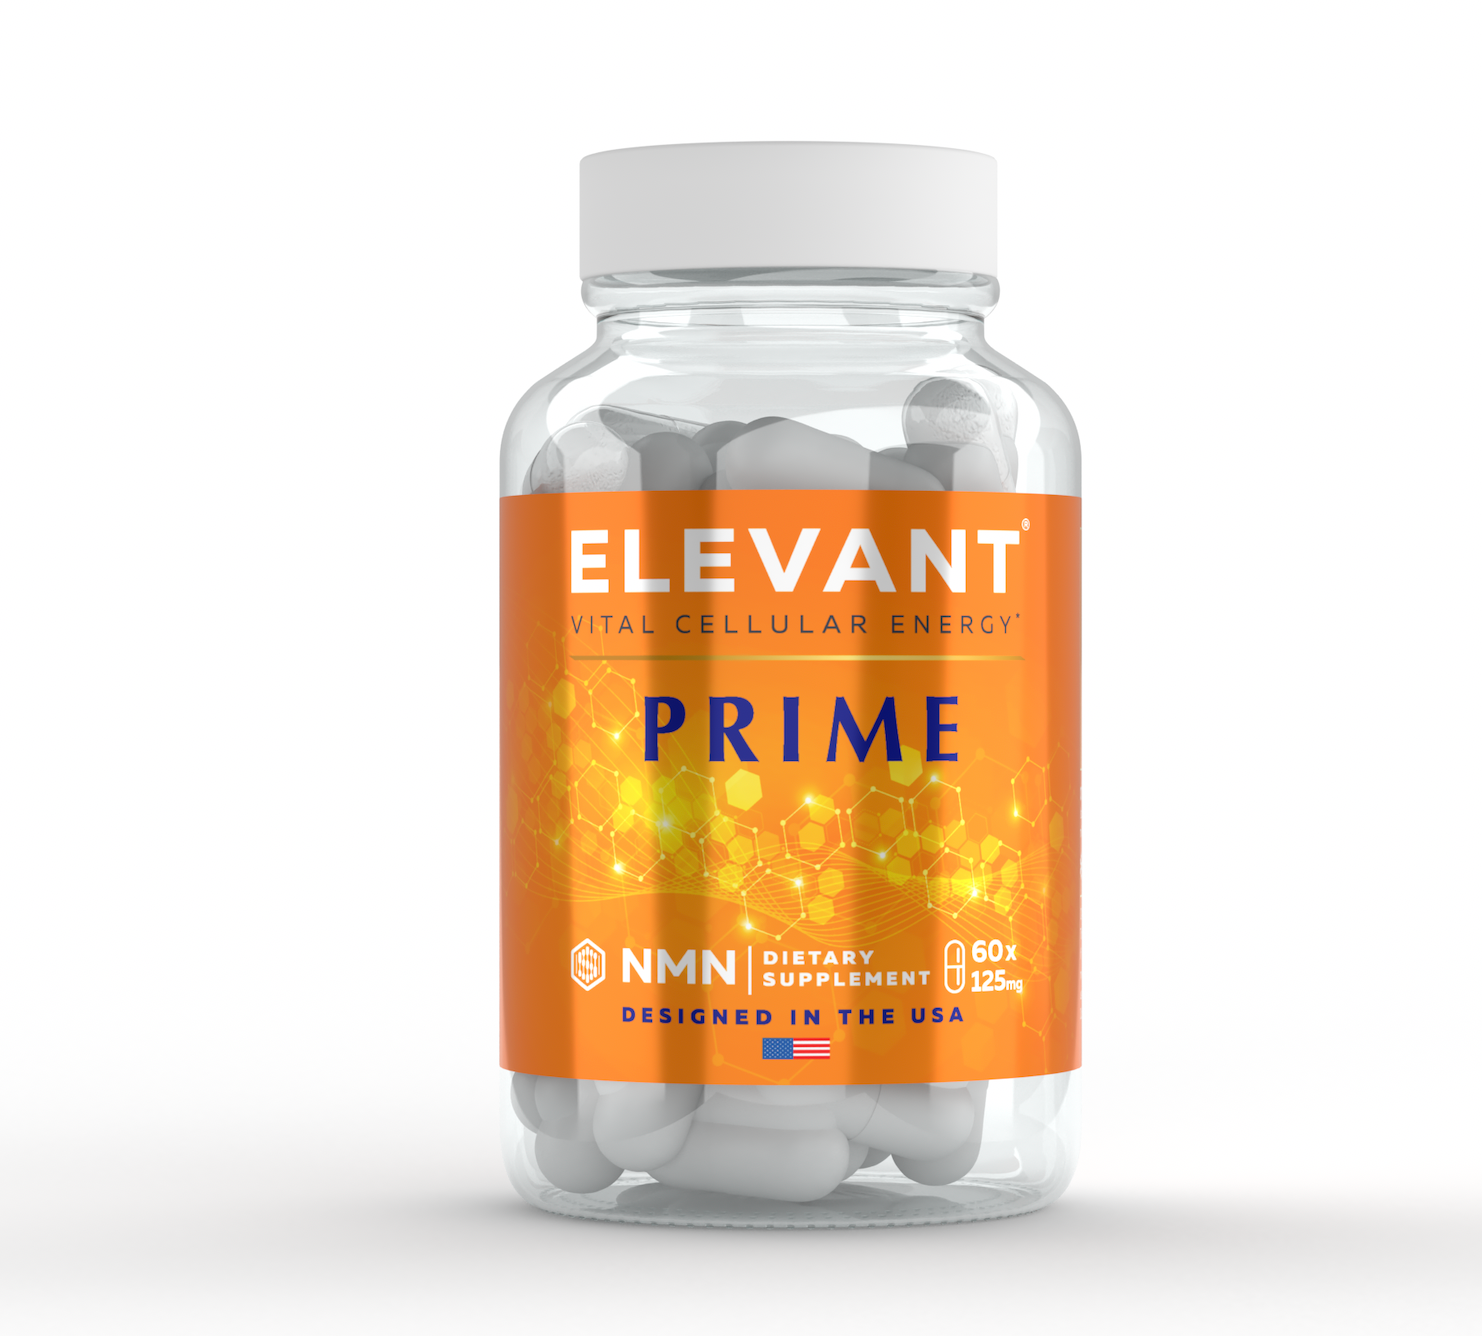 A new brand called Elevant has launched an NMN supplement to support cellular health